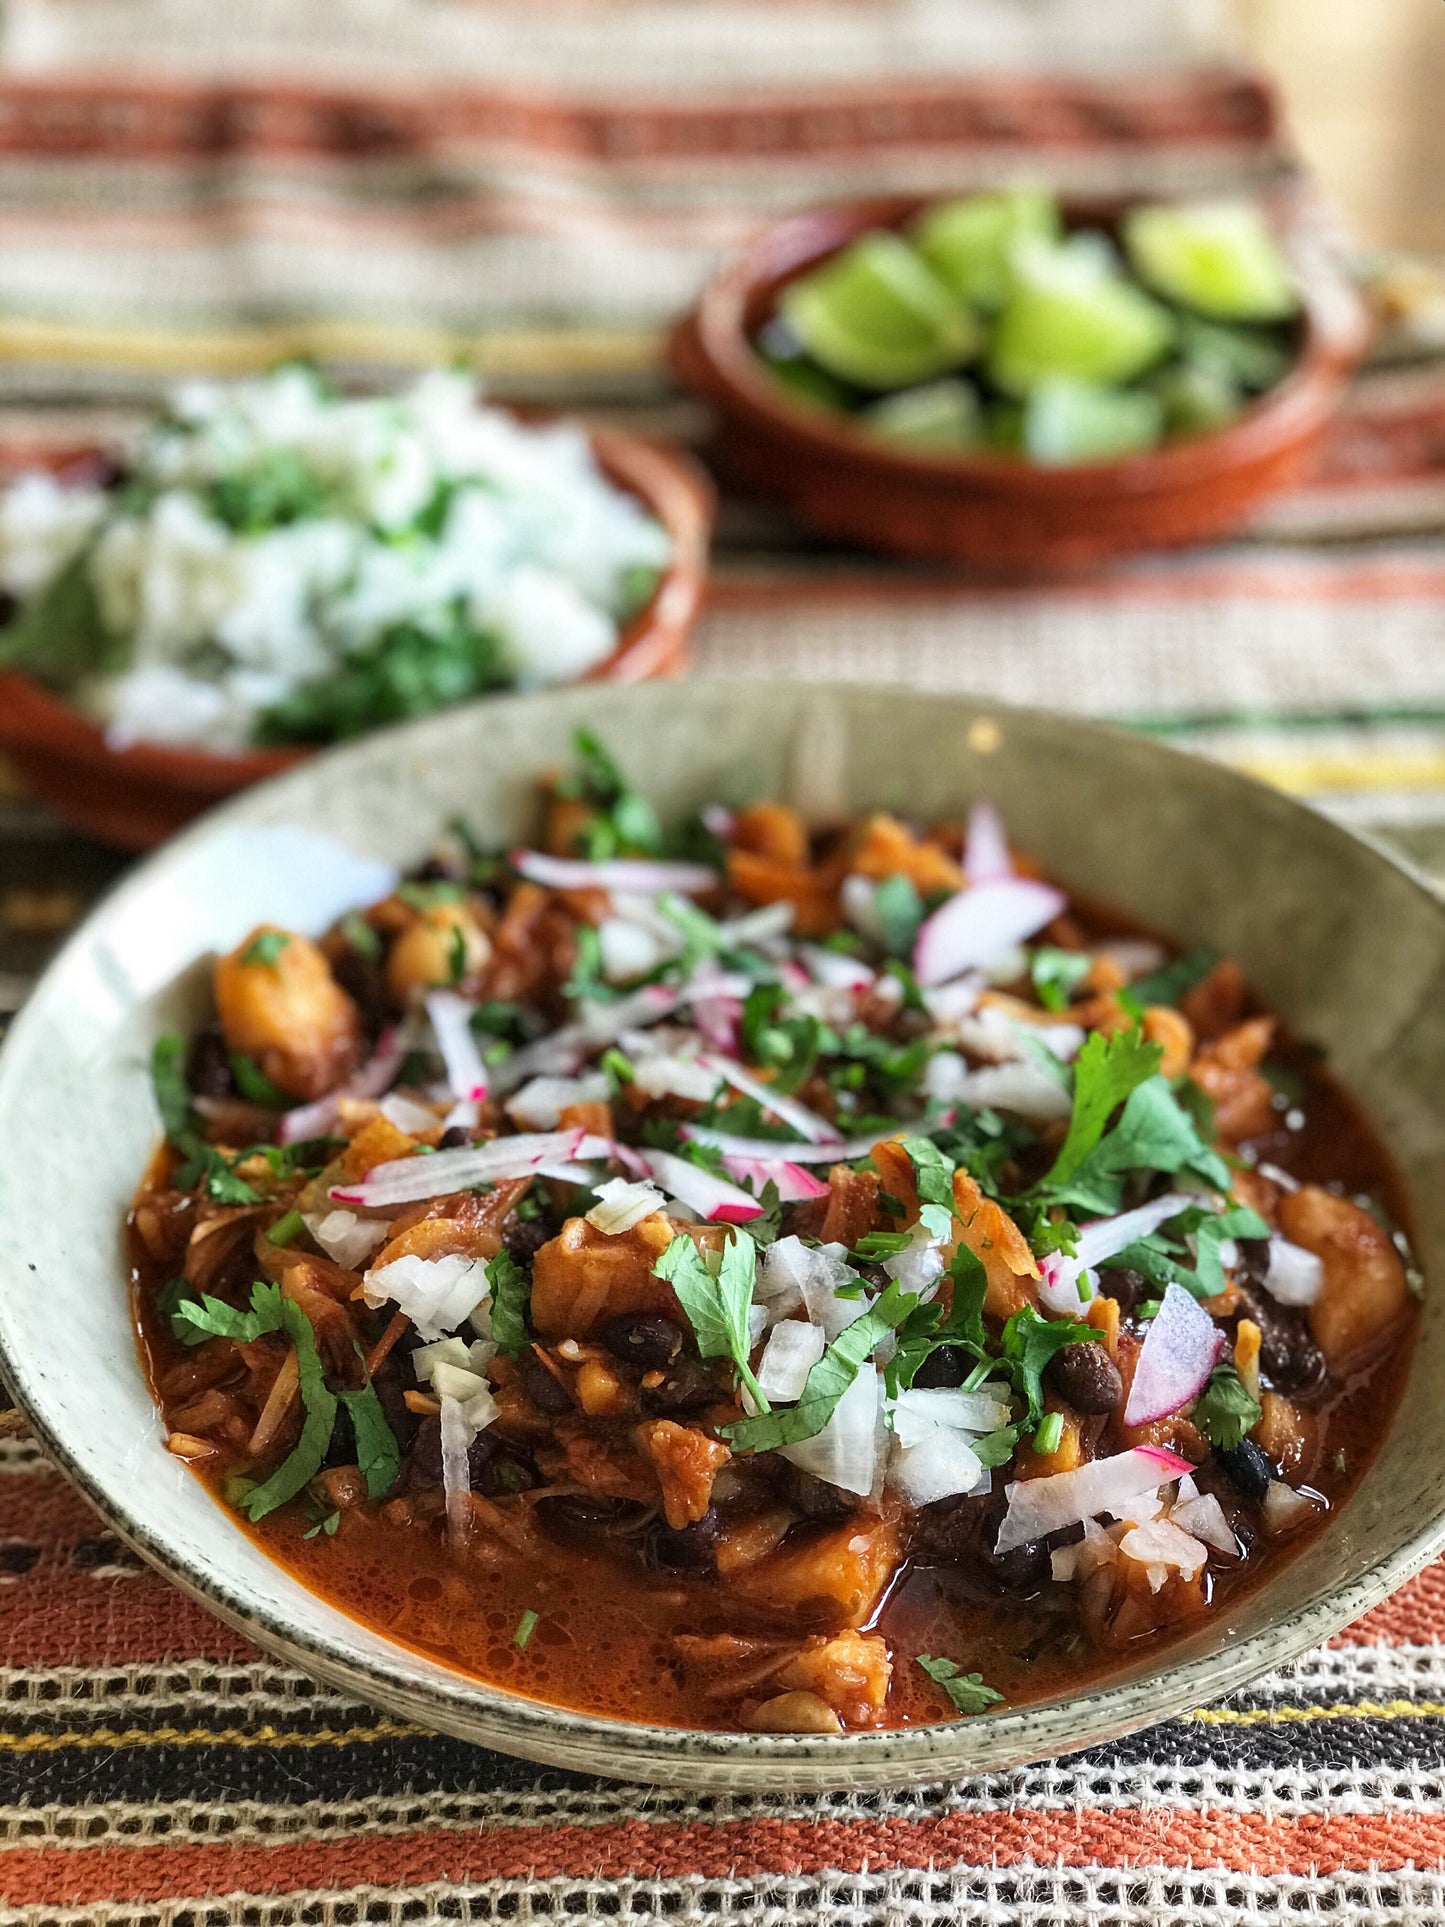 Frijole con Puerco ("Pork" and Bean Stew) - Serves 1-2